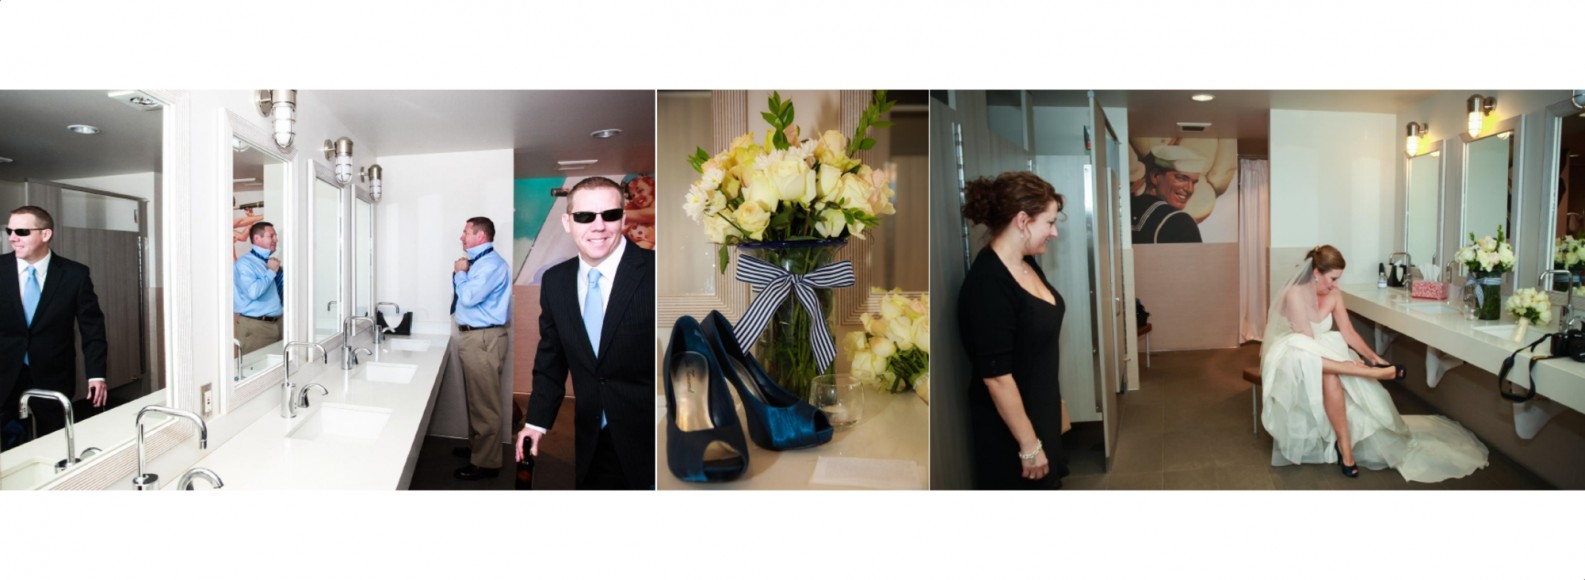 Laura and Davids Wedding Book - San Diego Yacht Wedding by Wedding Photographers Andrew Abouna - Pages 2-3